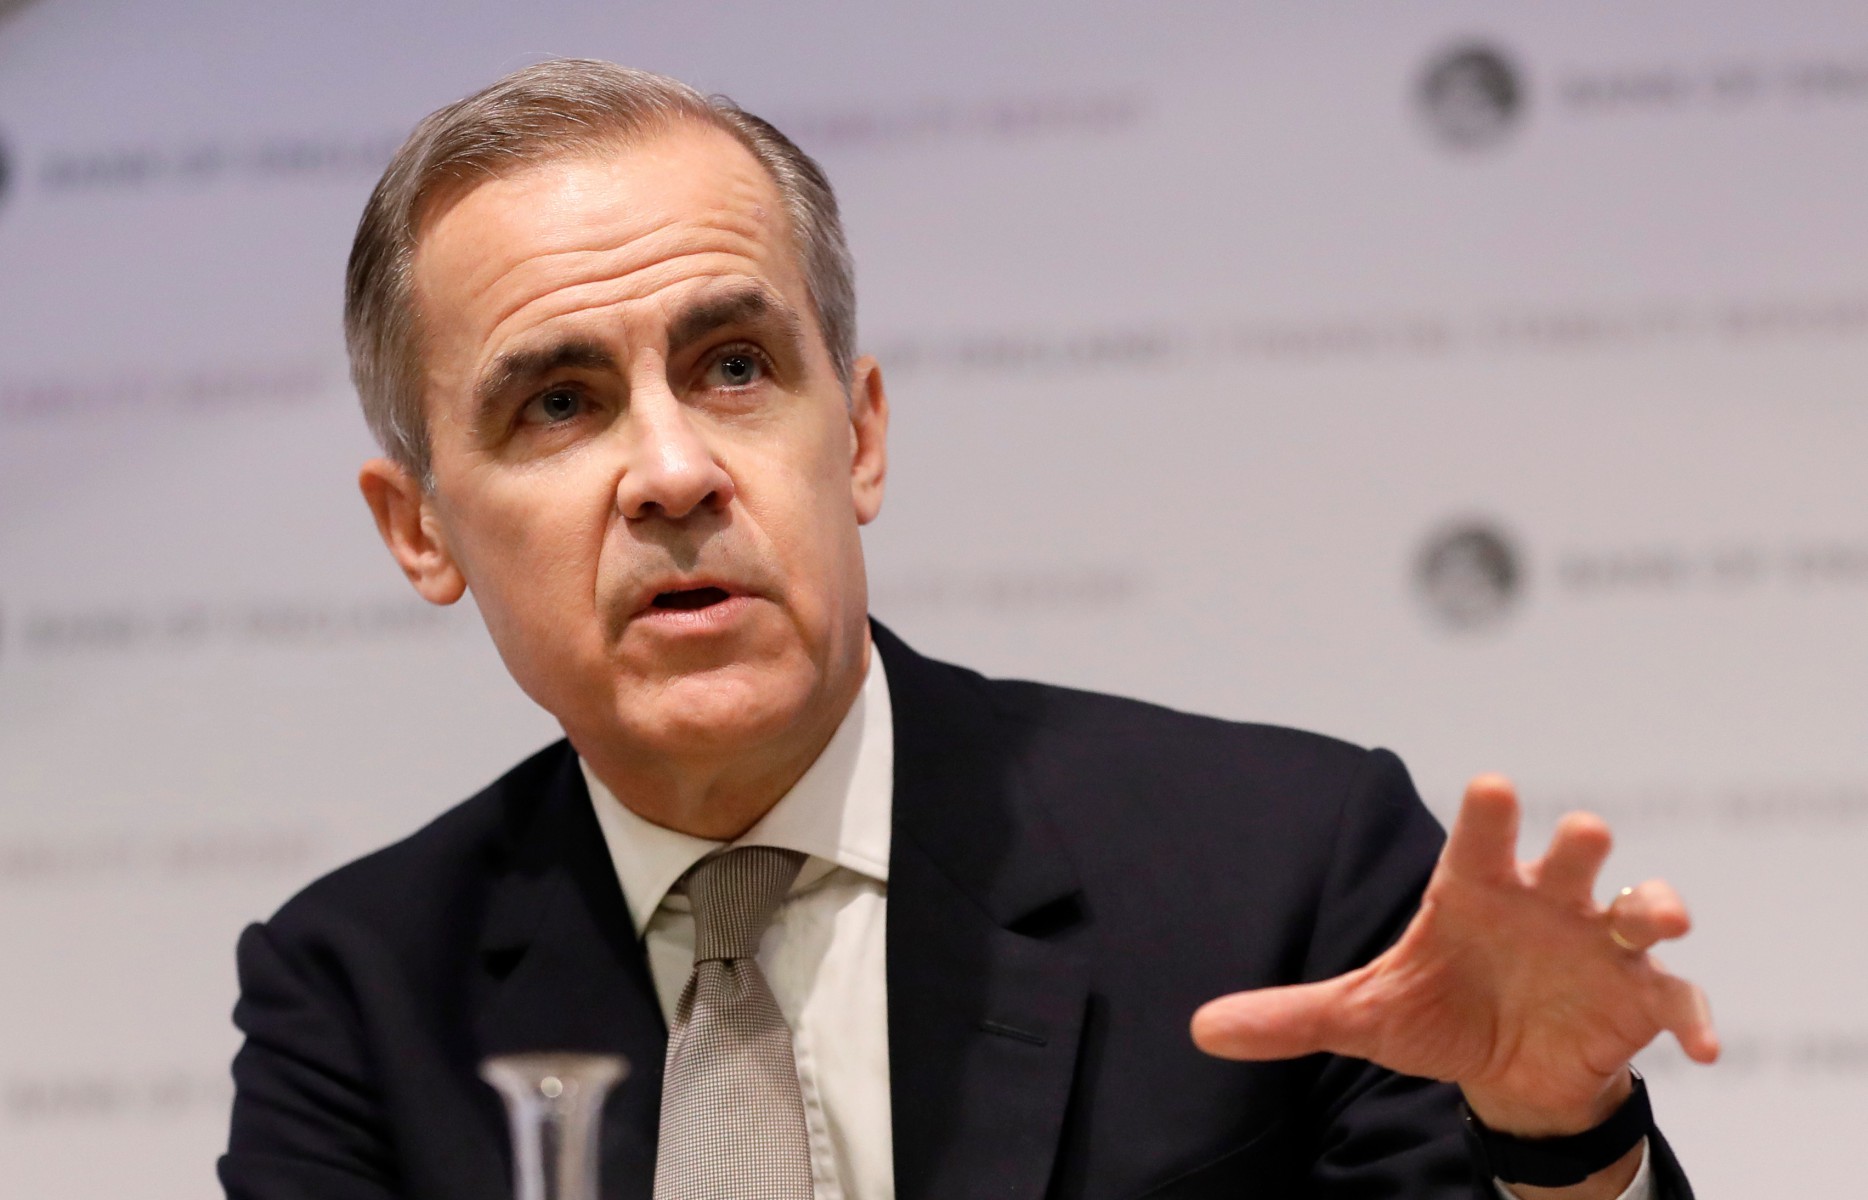 Mr Carney stepped into his role as the governor in July 2013